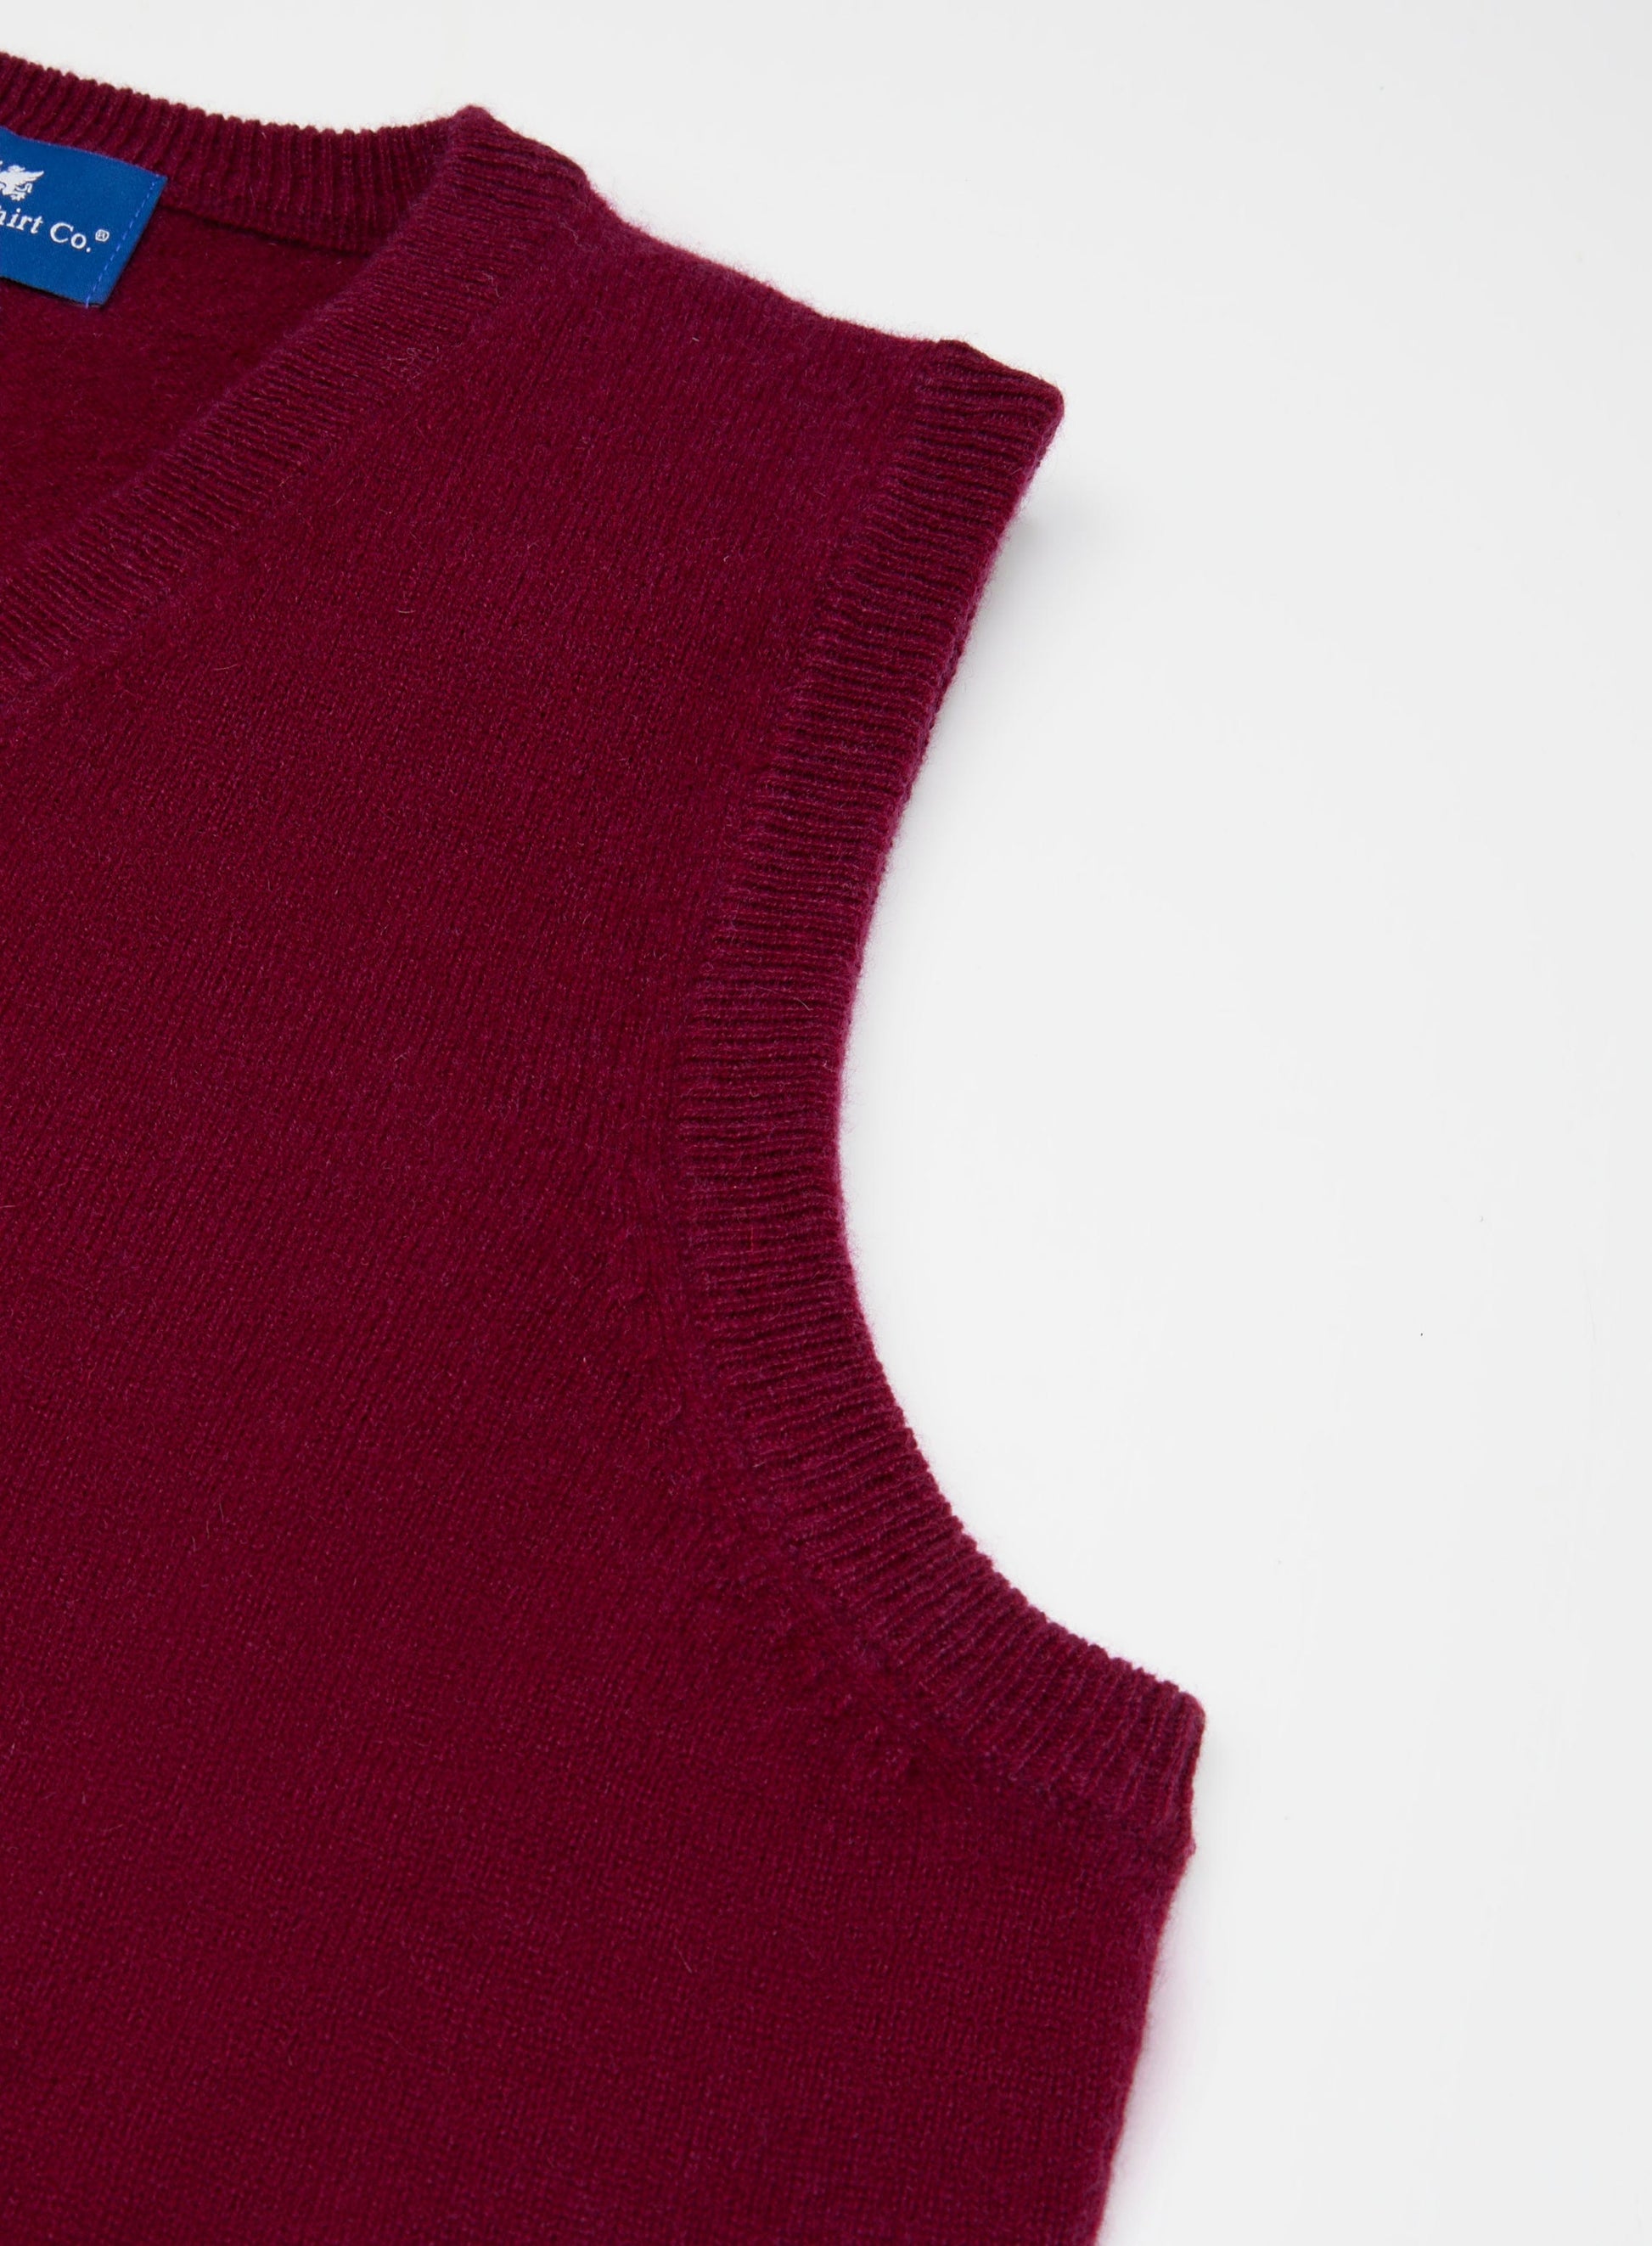 Cashmere Sleeveless in Bordeaux